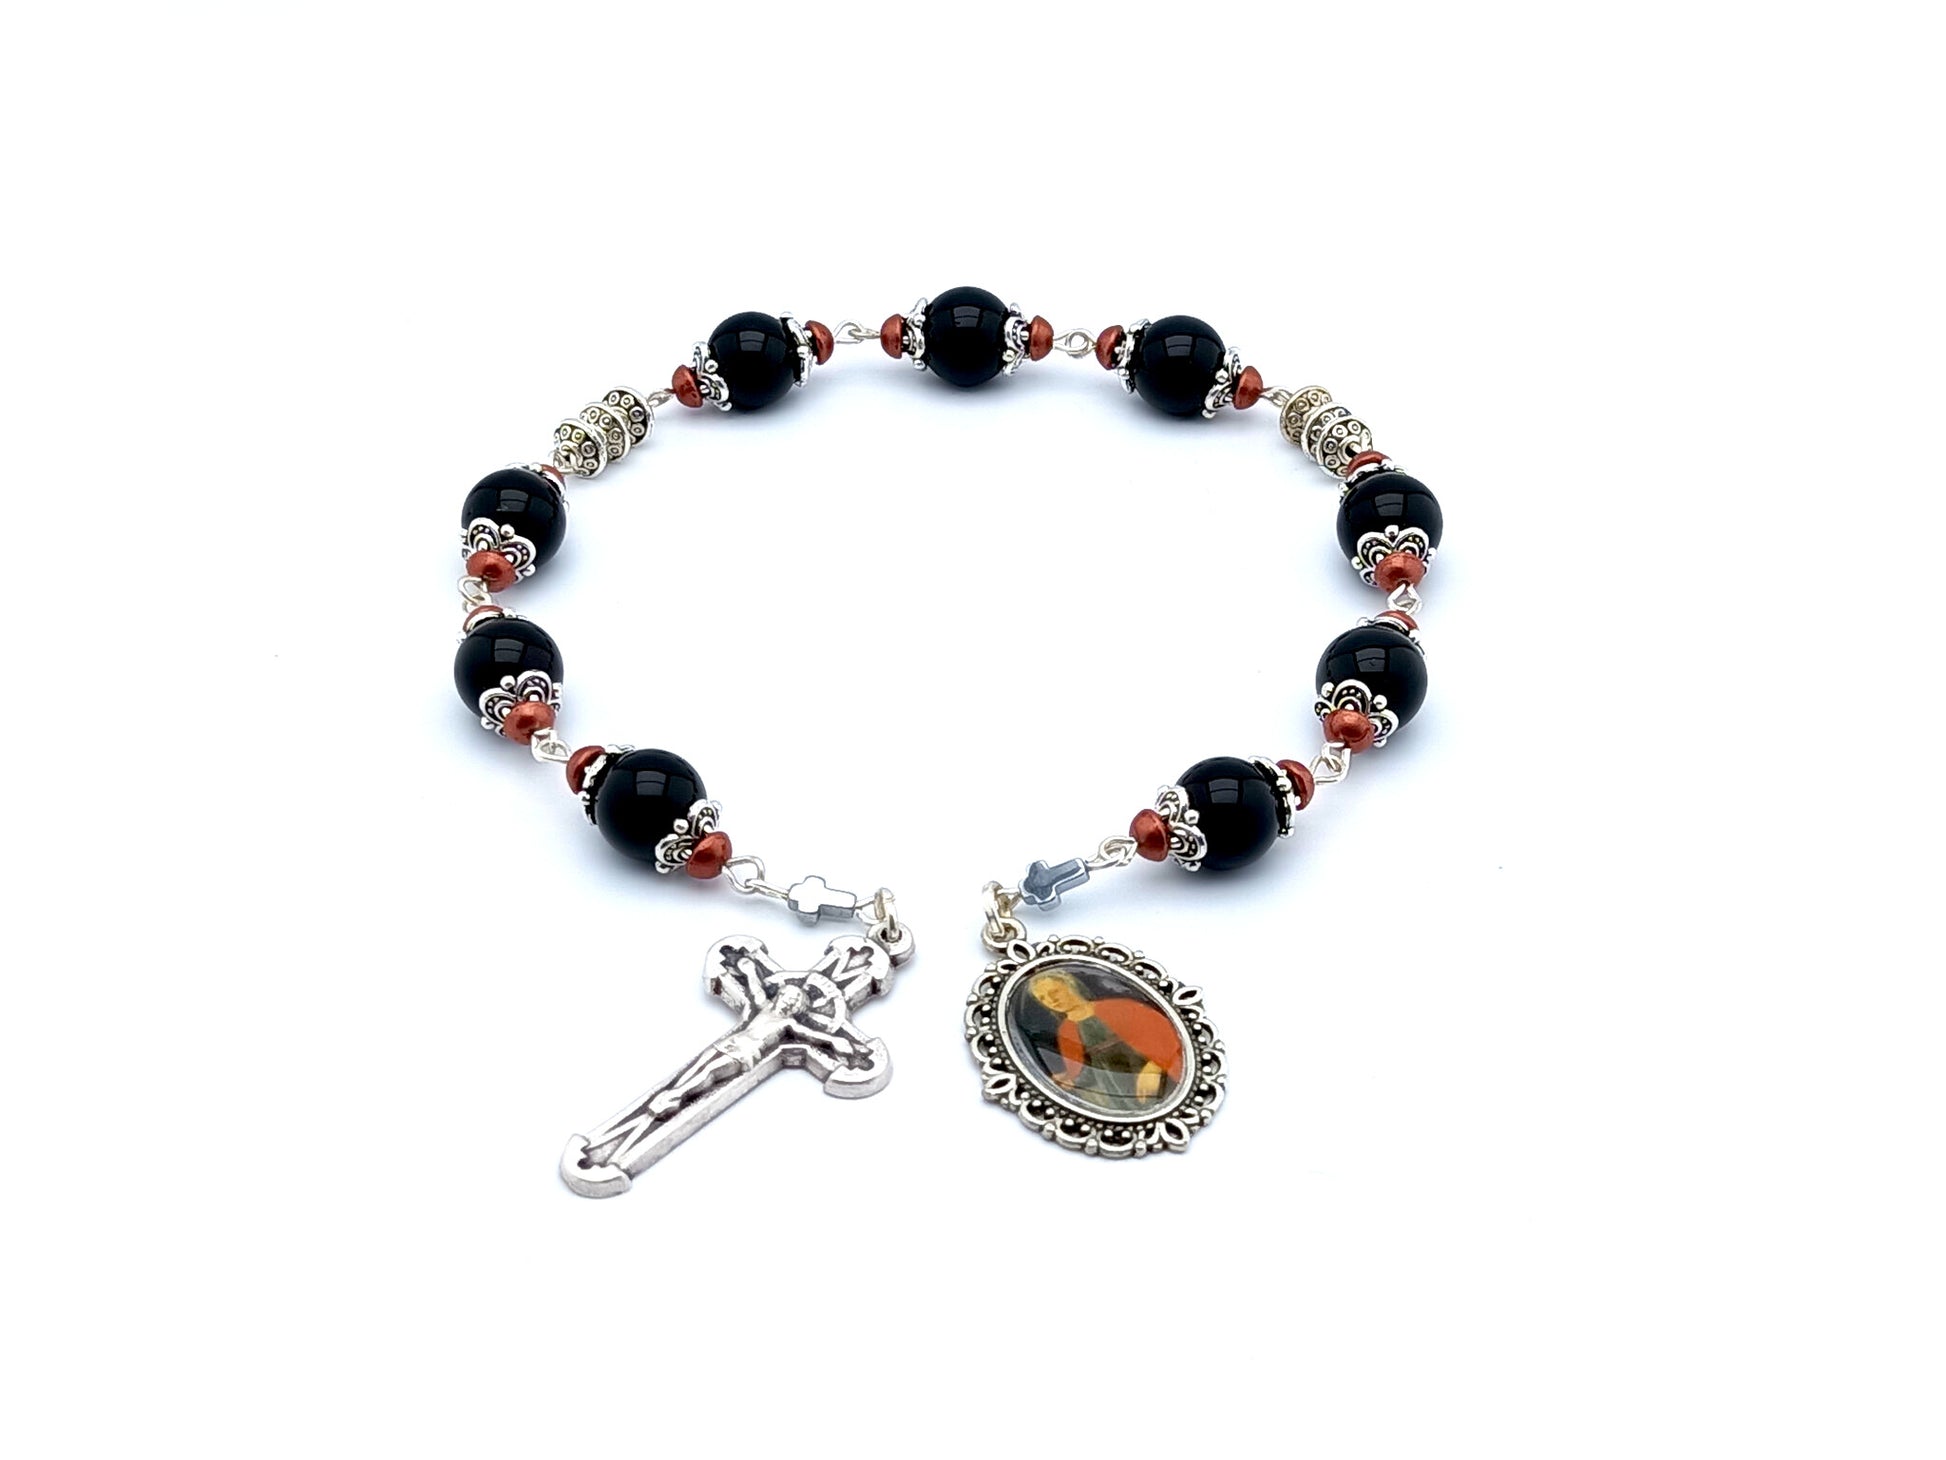 Saint Agatha unique rosary beads prayer chaplet with onyx gemstone beads, small silver crucifix and picture medal.